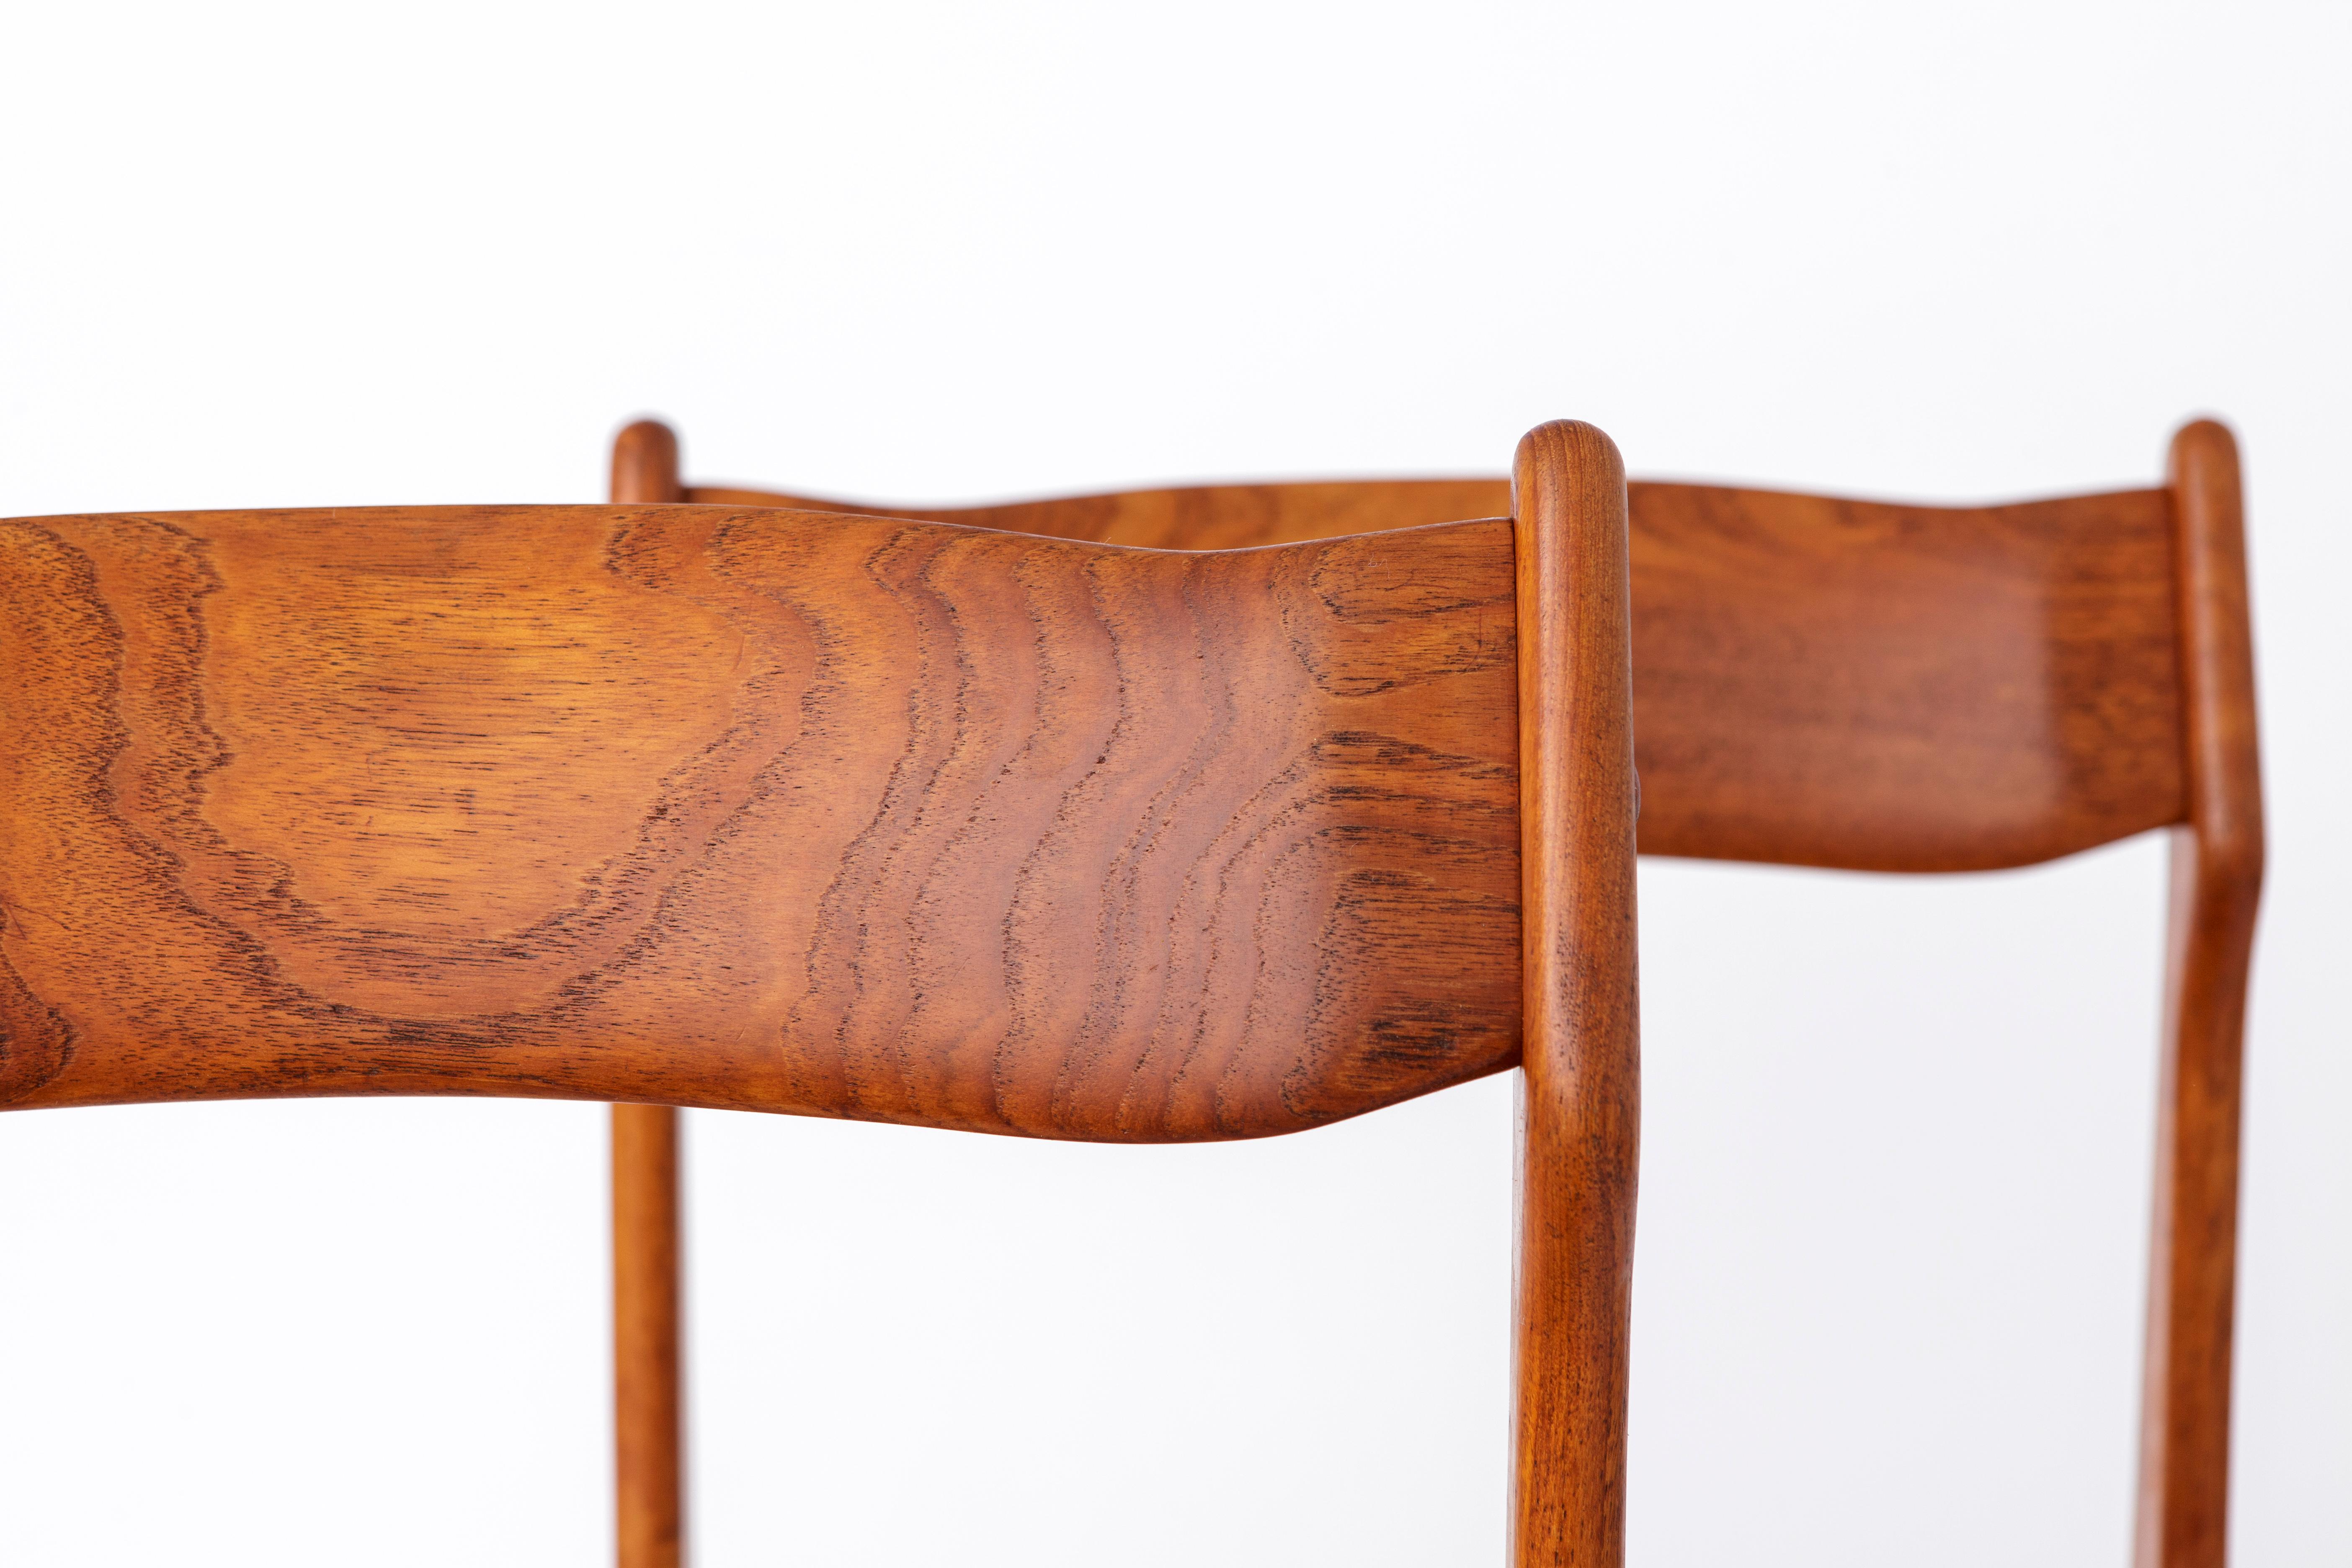 Polished 2 of 5 Vintage Danish Chairs 1960s - Walnut Chair Frame For Sale